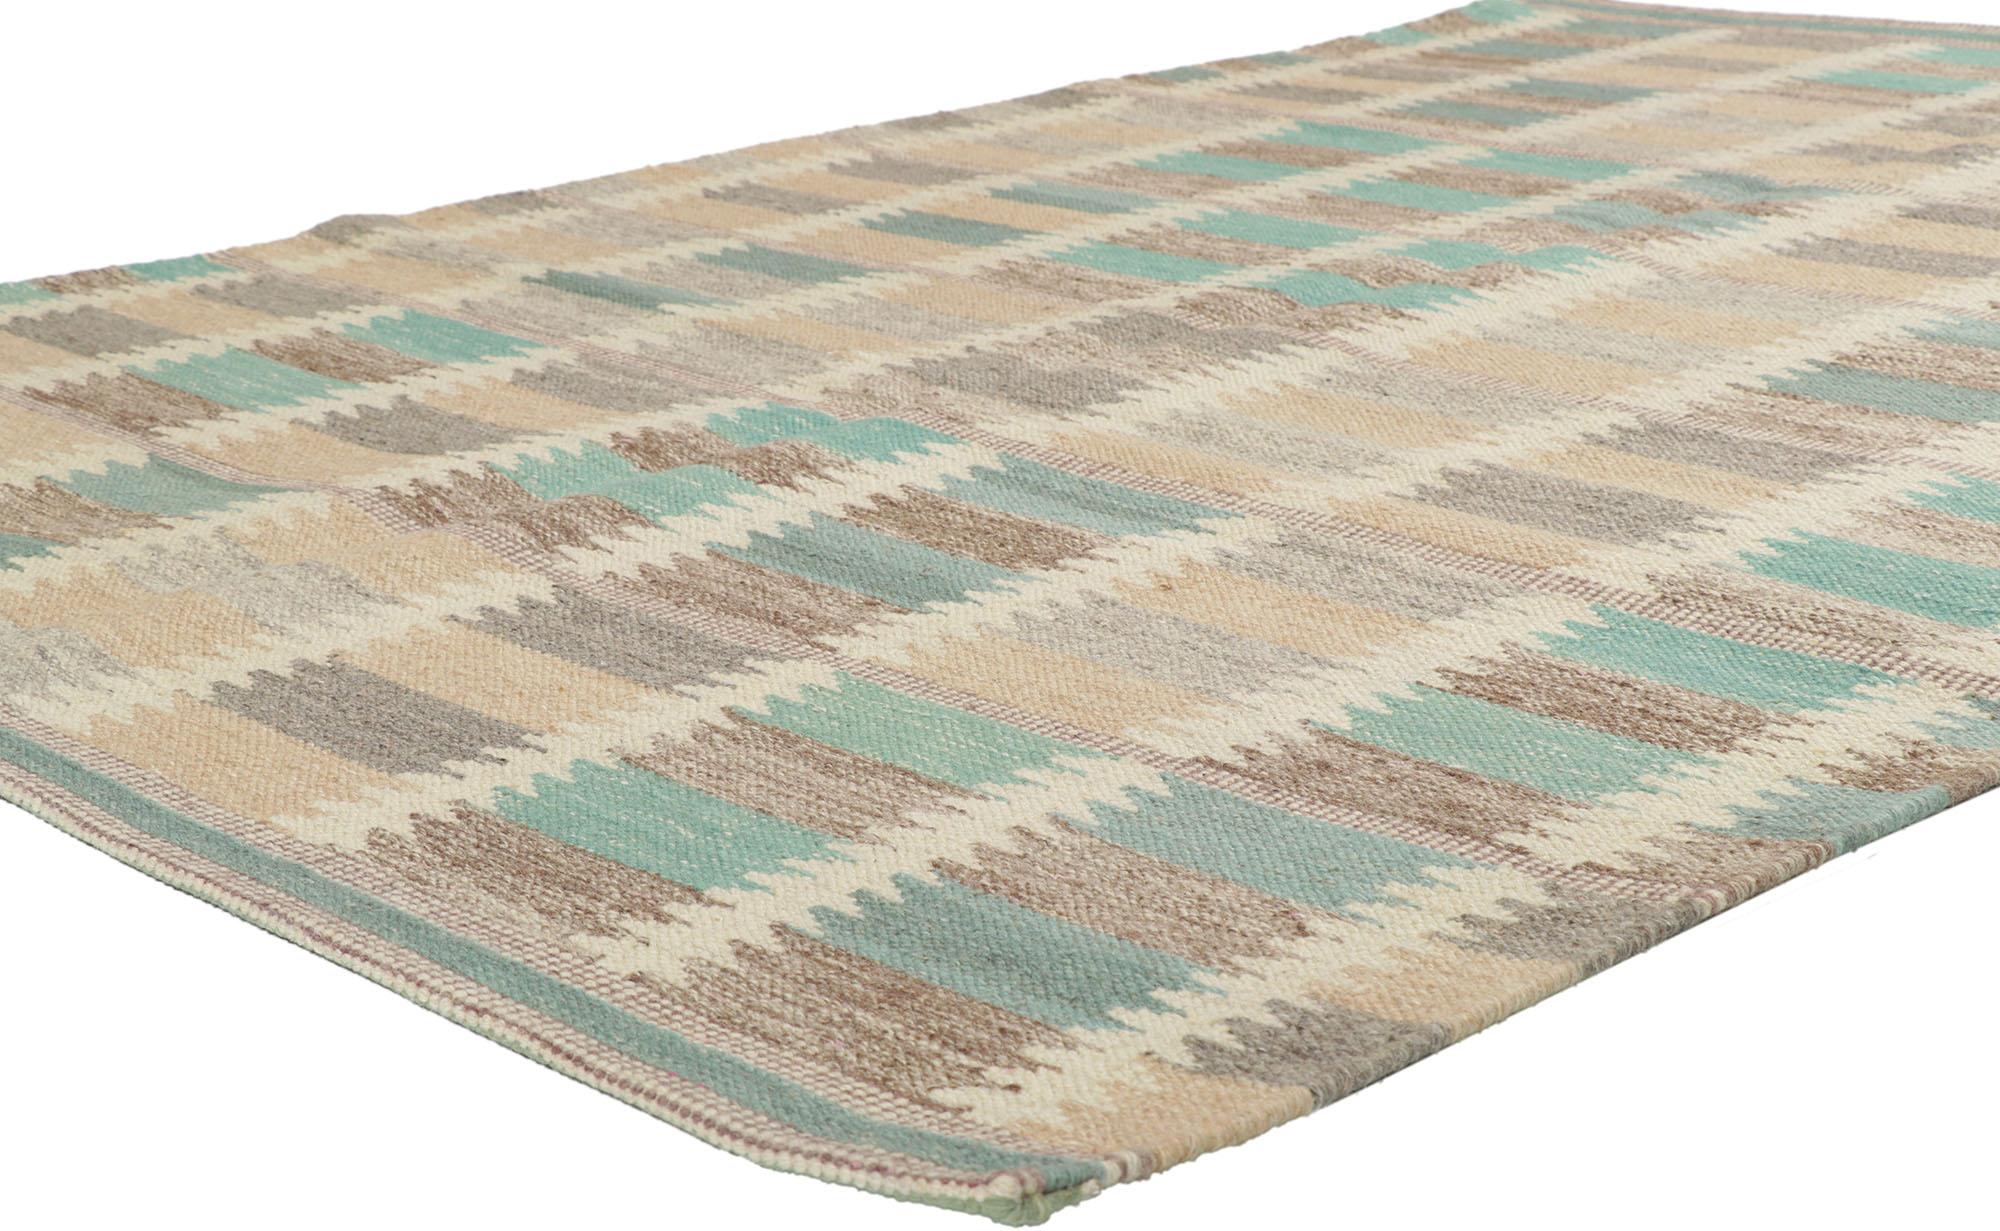 30692 new Swedish inspired Kilim rug with Scandinavian Modern style 06'02 x 08'07. With its simplicity, geometric design and soft colors, this hand-woven wool Swedish inspired Kilim rug is a vision of woven beauty. The abrashed field features an